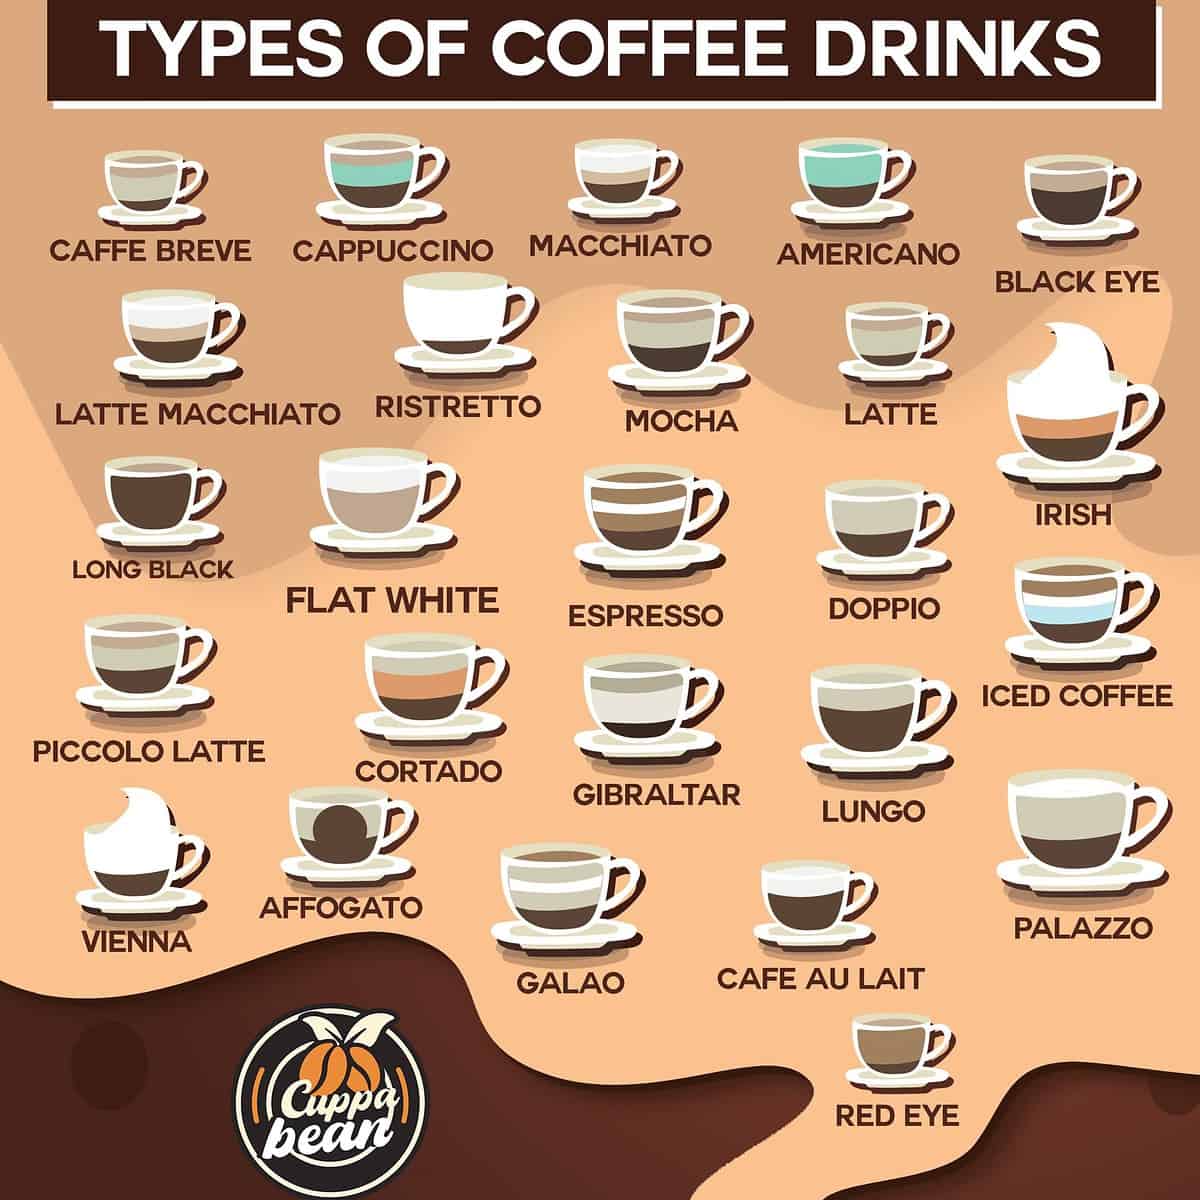 25 Different Types of Coffee Drinks, Explained (Infographic)